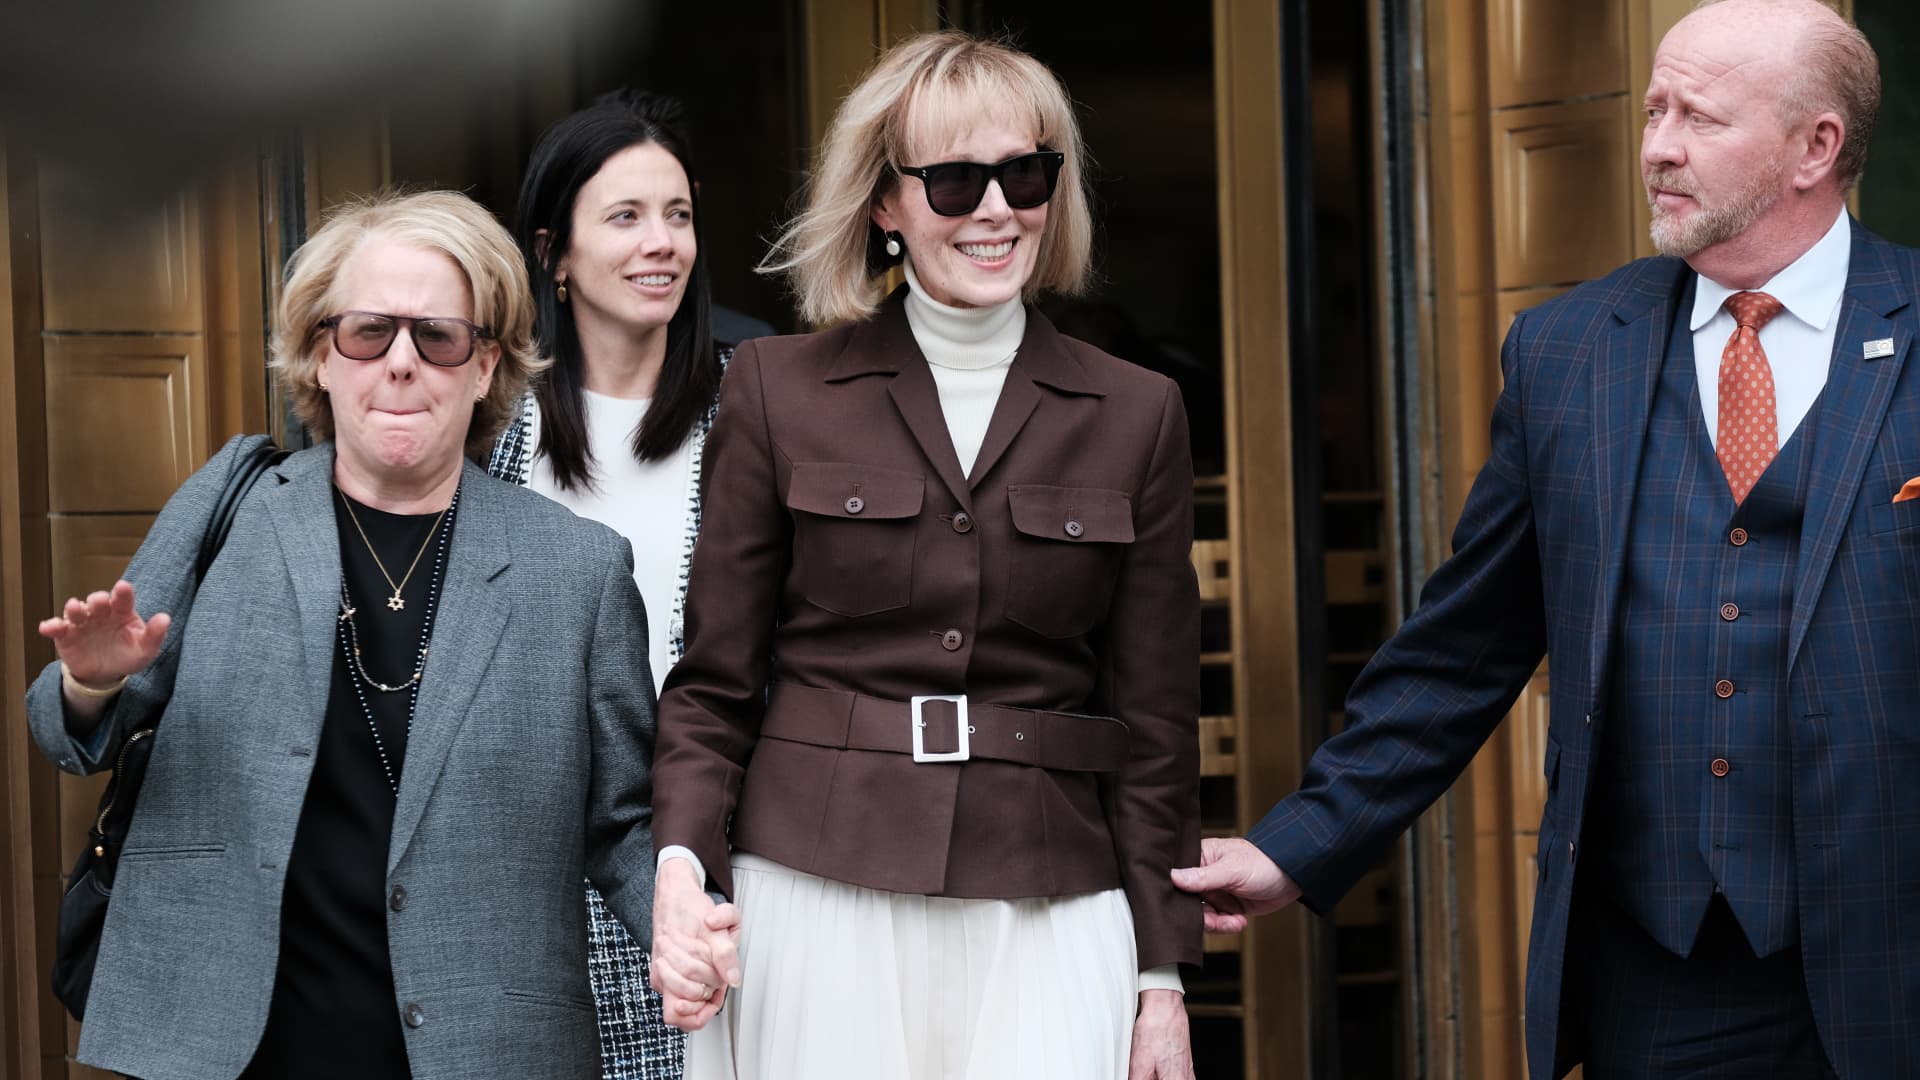 Writer E. Jean Carroll leaves a Manhattan courthouse after a jury found former President Donald Trump liable for sexually abusing her in a Manhattan department store in the 1990s, in New York City on May 9, 2023.